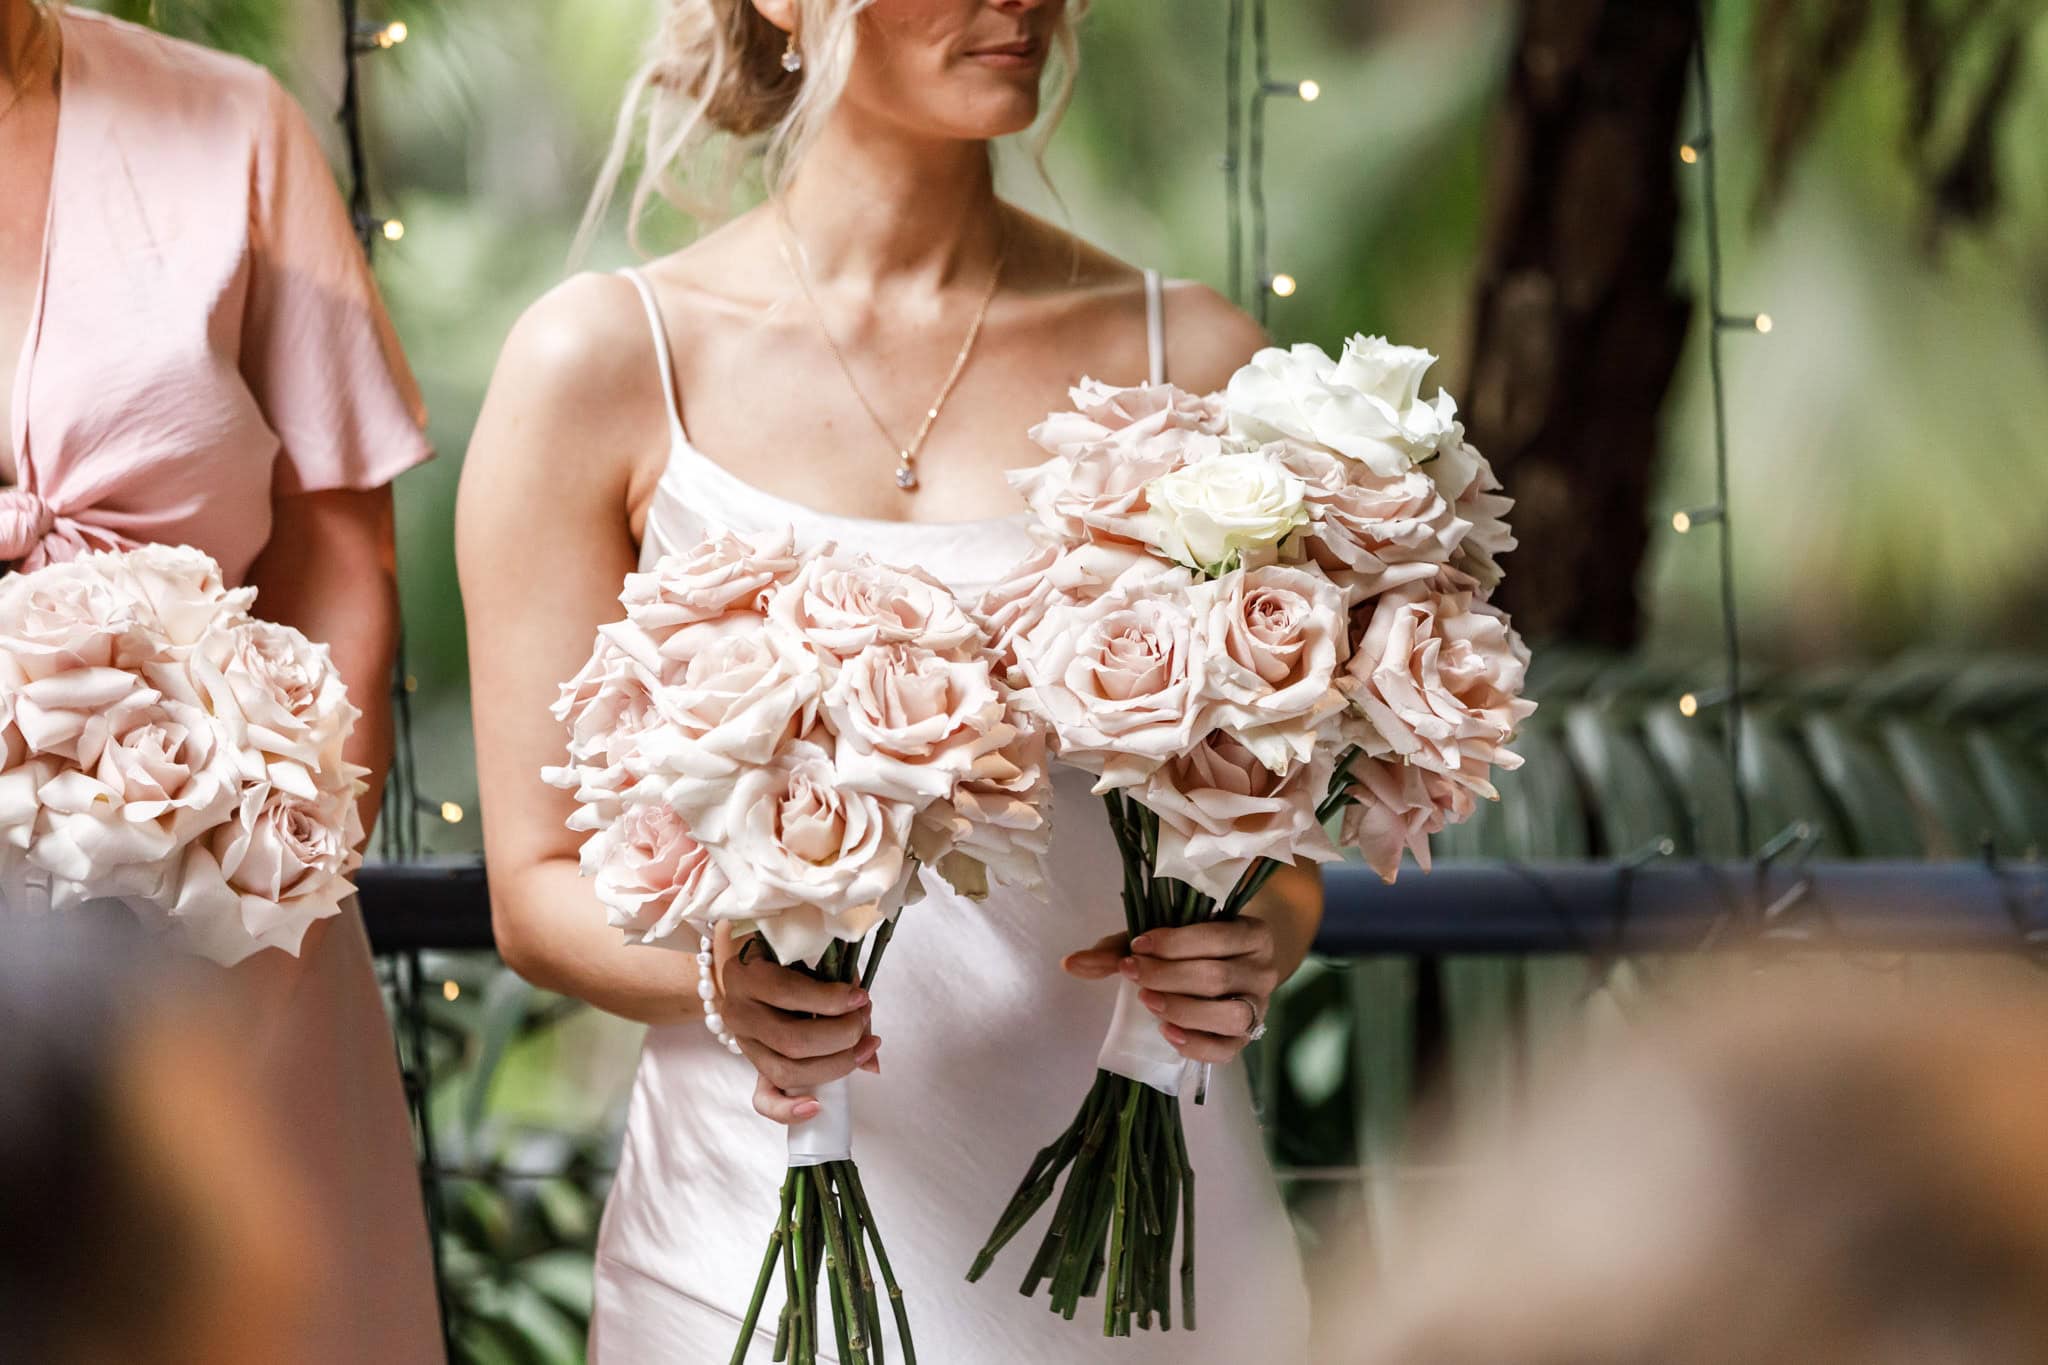 Bridesmaid holding wedding flowers for bride during ceremony.